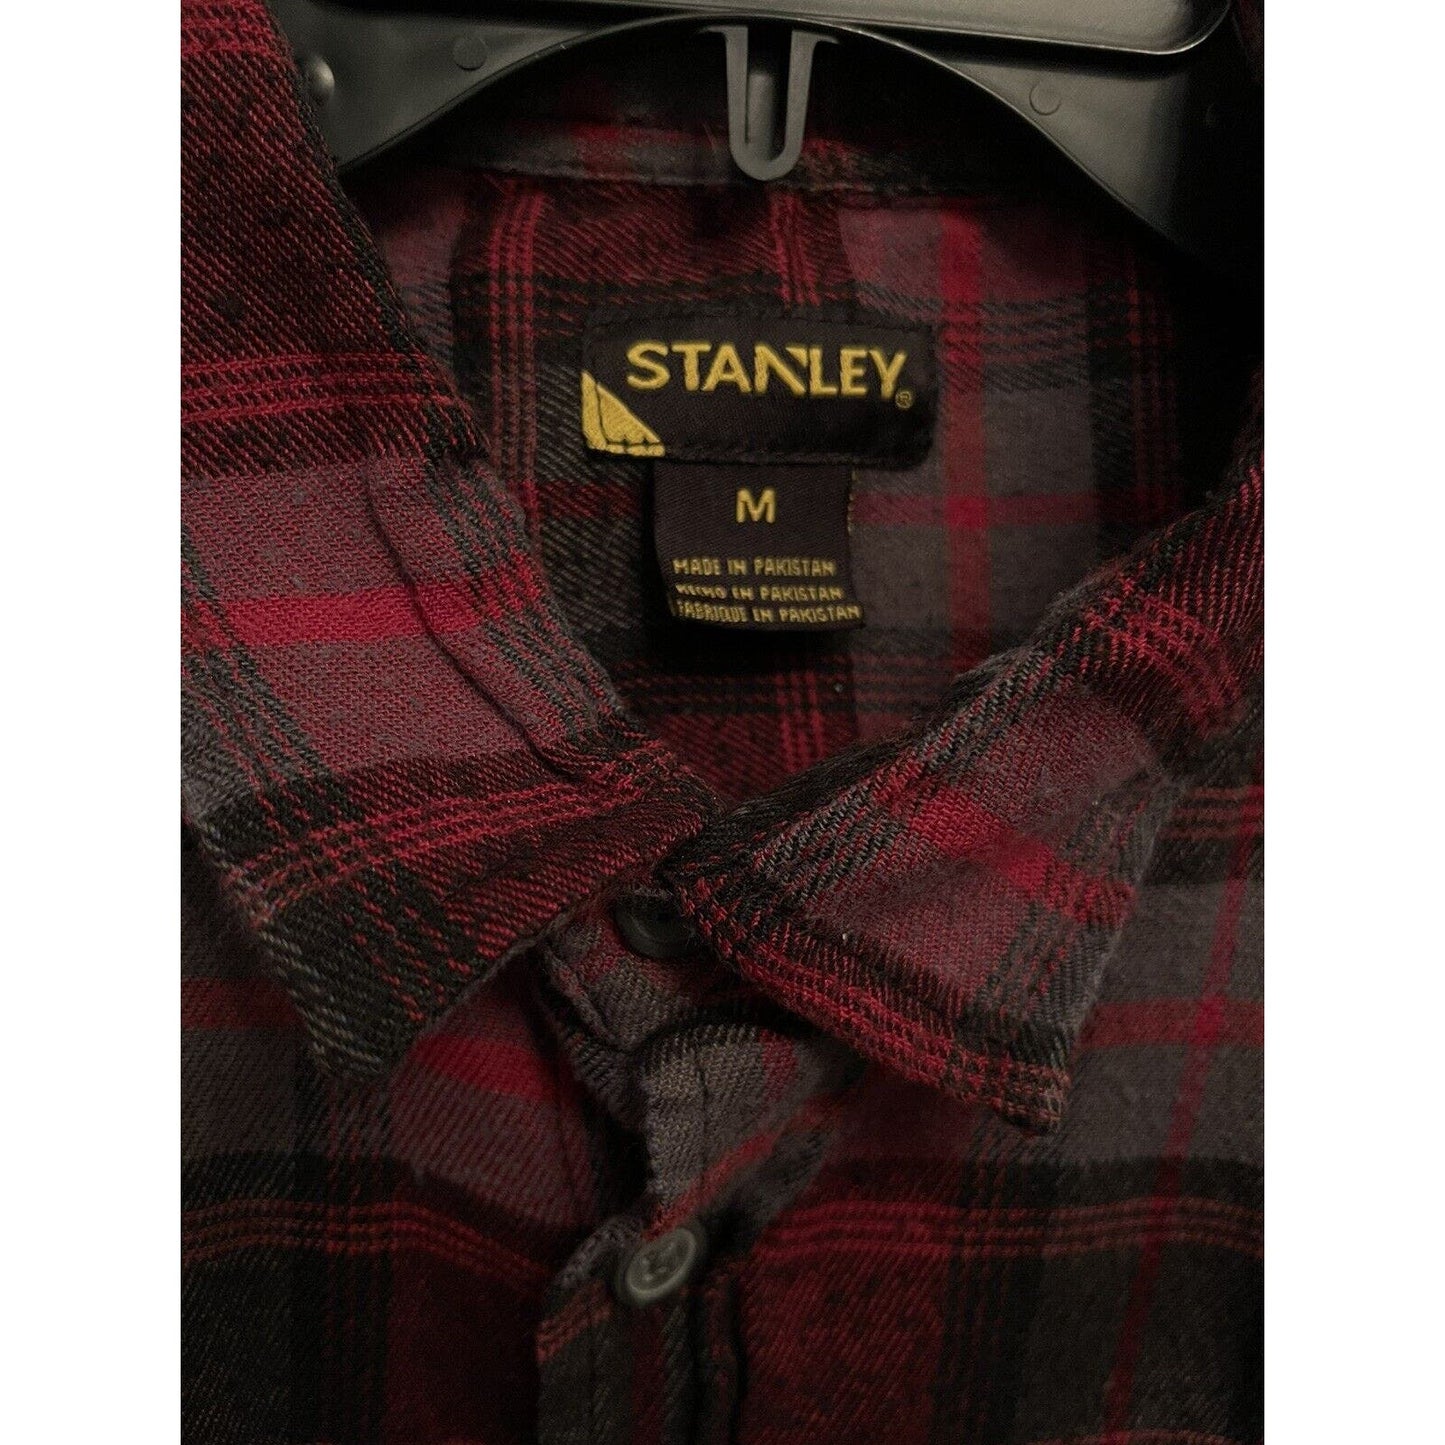 Stanley Red & Black Flannel Button Up Shirt Size Medium Mens Long Sleeve